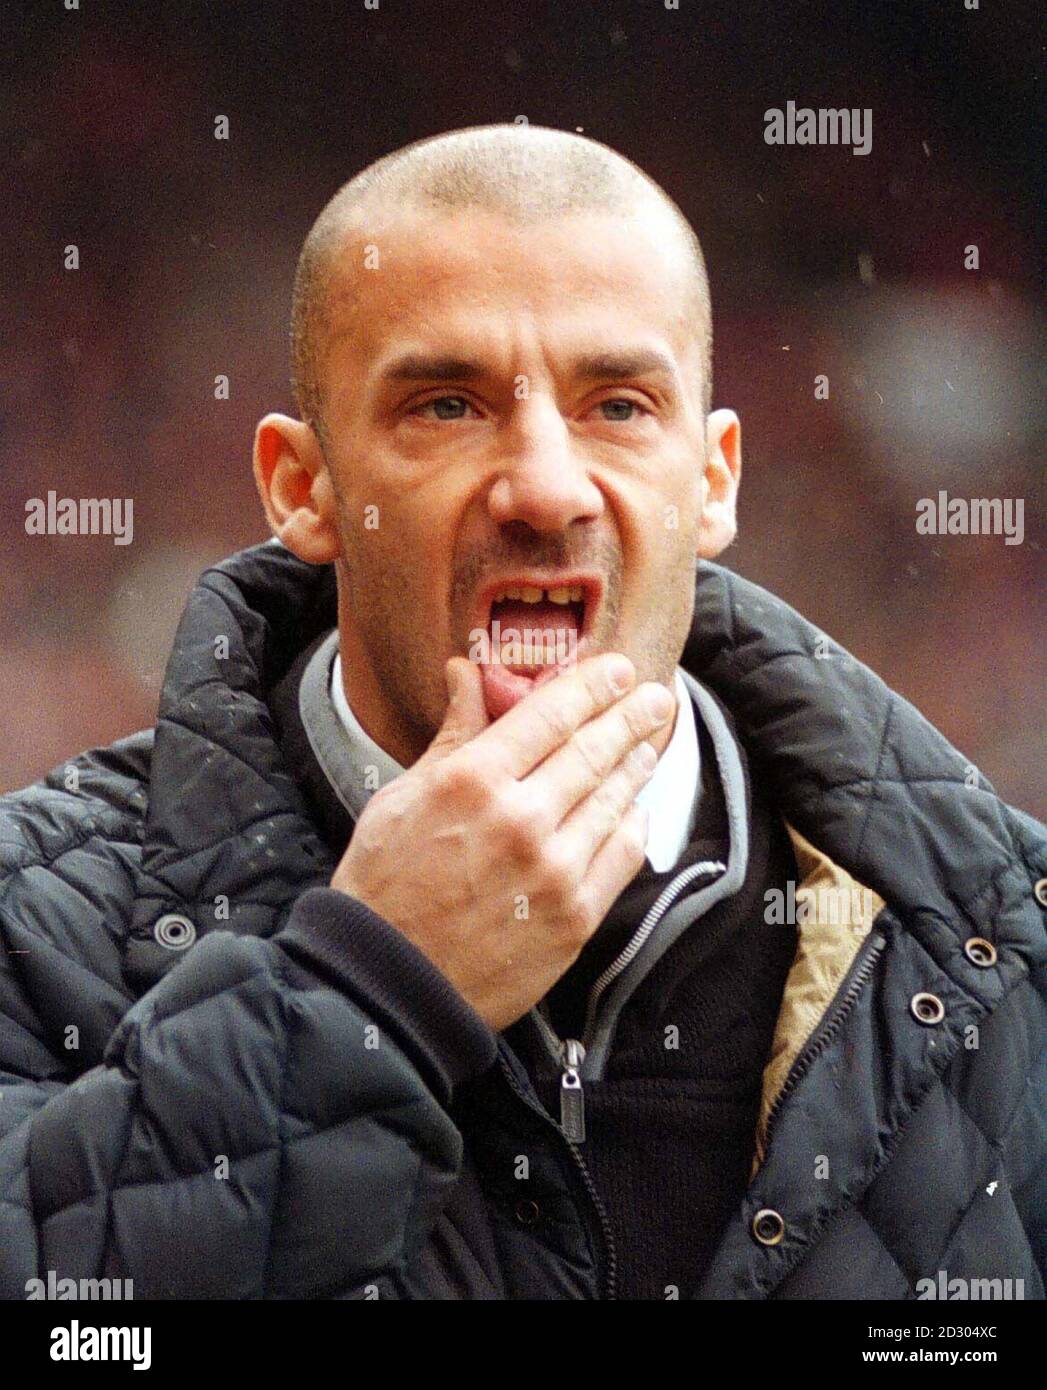 This picture can only be used within the context of an editorial feature. Chelsea manager Gianluca Vialli deep in thought, during his sides 0-0 draw, against Manchester United, in the FA Cup Quarter Final clash at Old Trafford.*12/09/2000 Vialli is sacked as manager by Chelsea, according to Sky Sports.com.  19/04/04: Gianluca Vialli who has fired a broadside at the man who dismissed him - former Chelsea chairman Ken Bates. The former Italy striker was fired in September 2000 in spite of winning three trophies for the club. Stock Photo